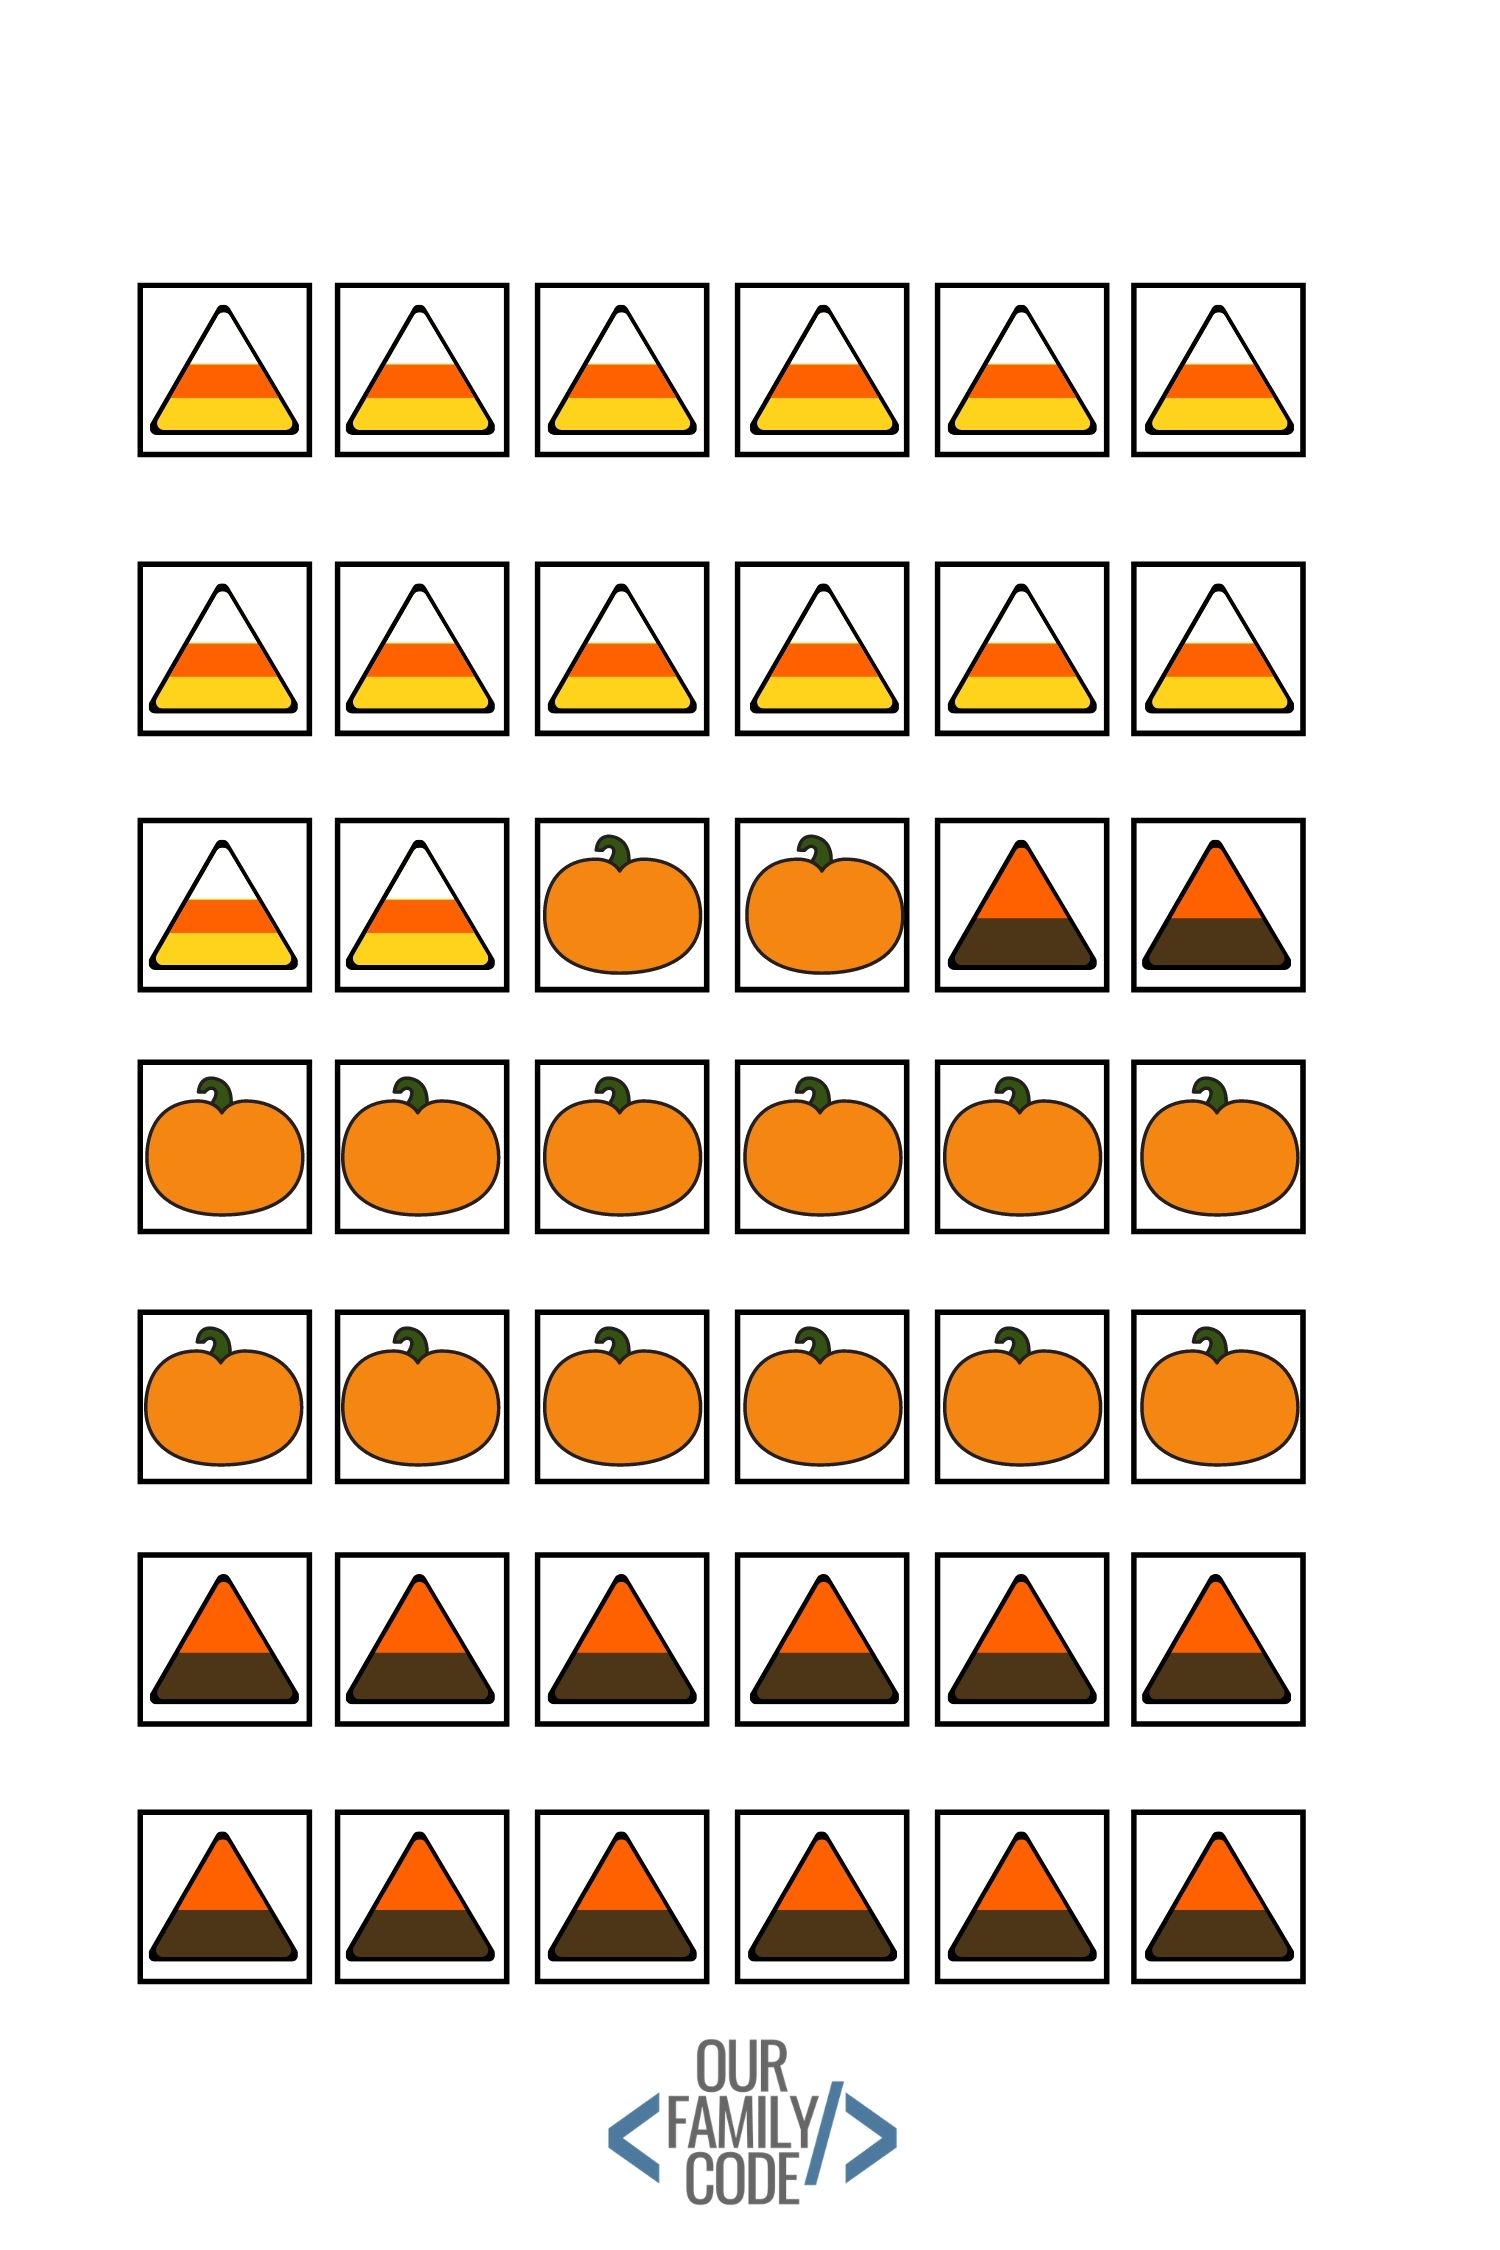 A picture pf candy corn and candy pumpkin pieces for preschool sequencing activity.